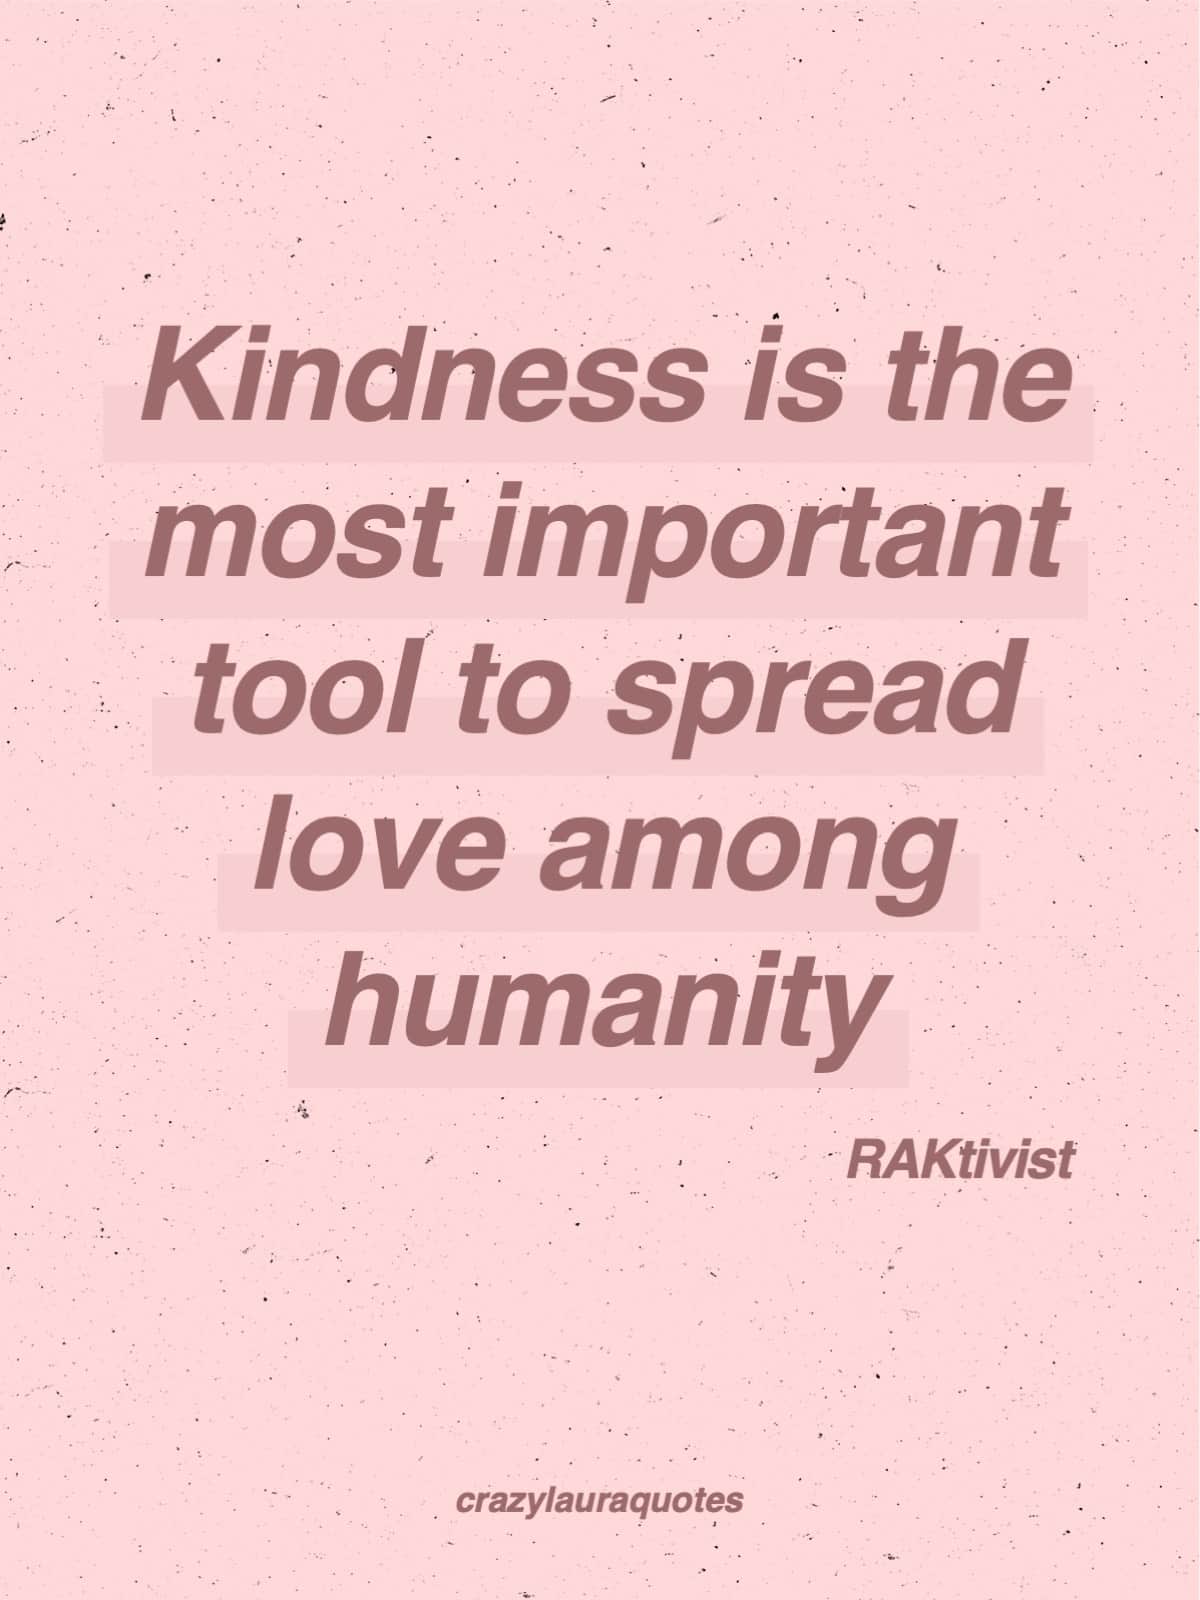 kindness to spread love quote